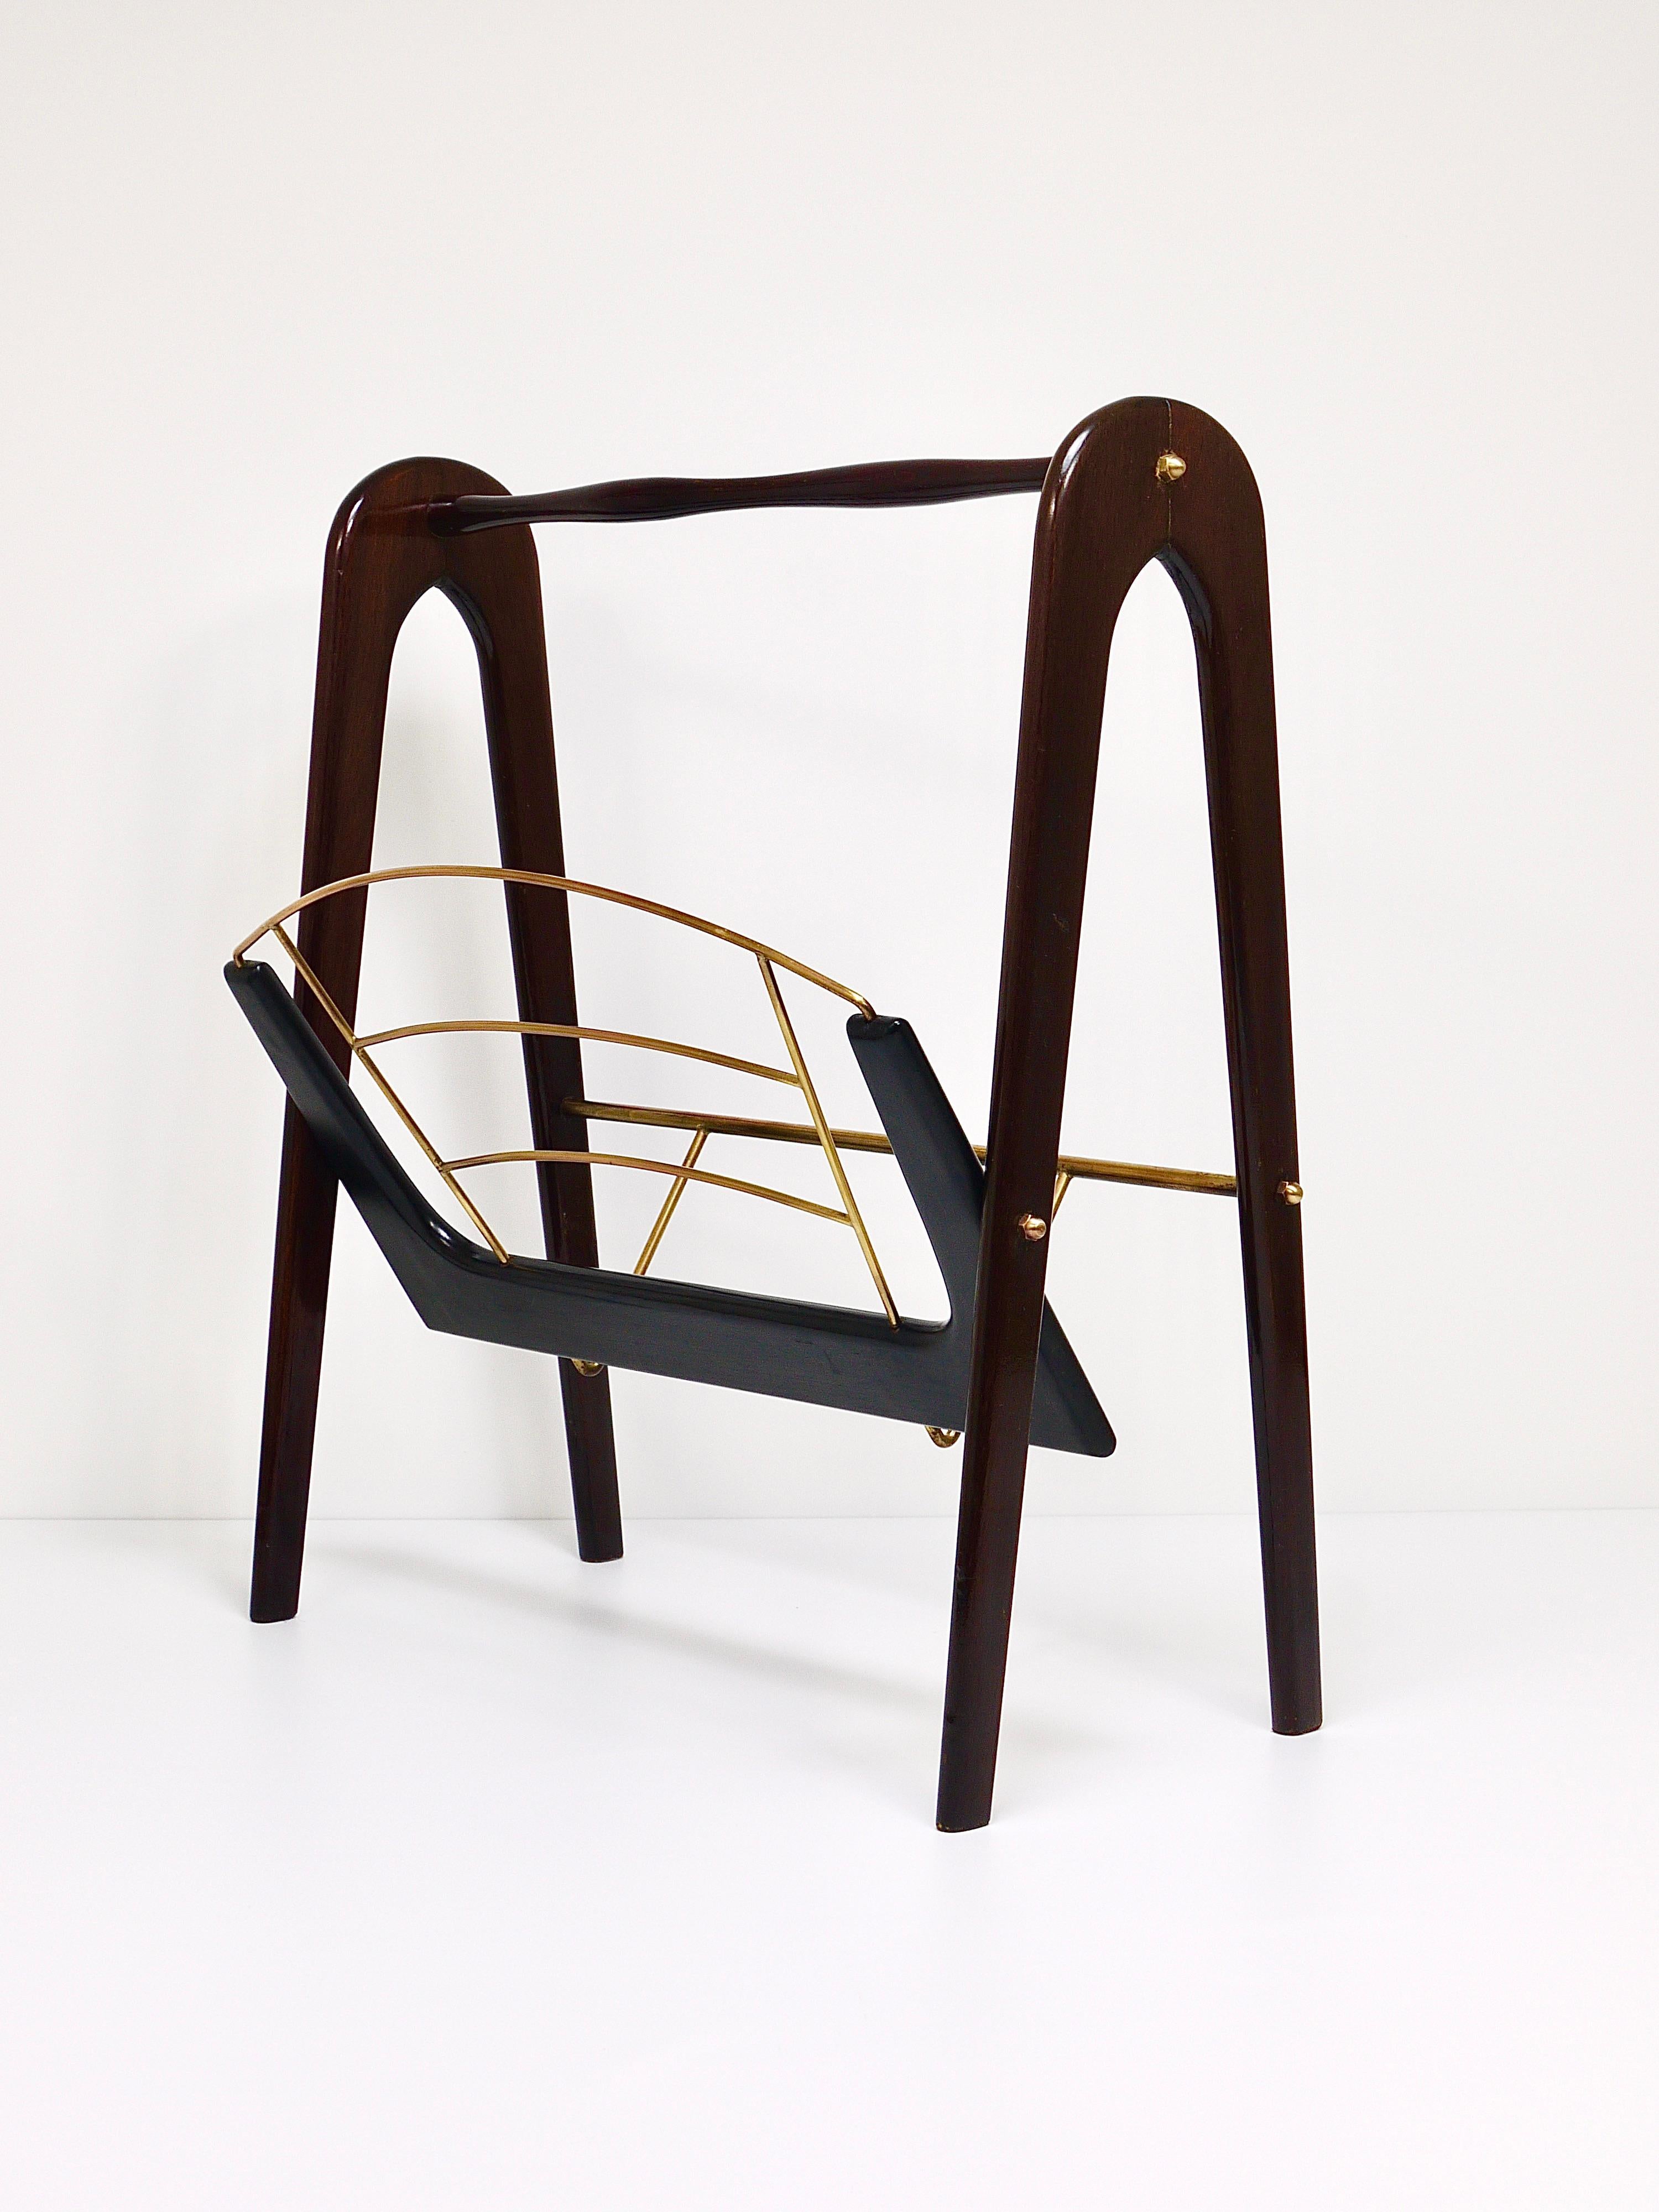 Cesare Lacca Midcentury Magazine Rack, Mahogany & Brass, Italy, 1950s For Sale 4